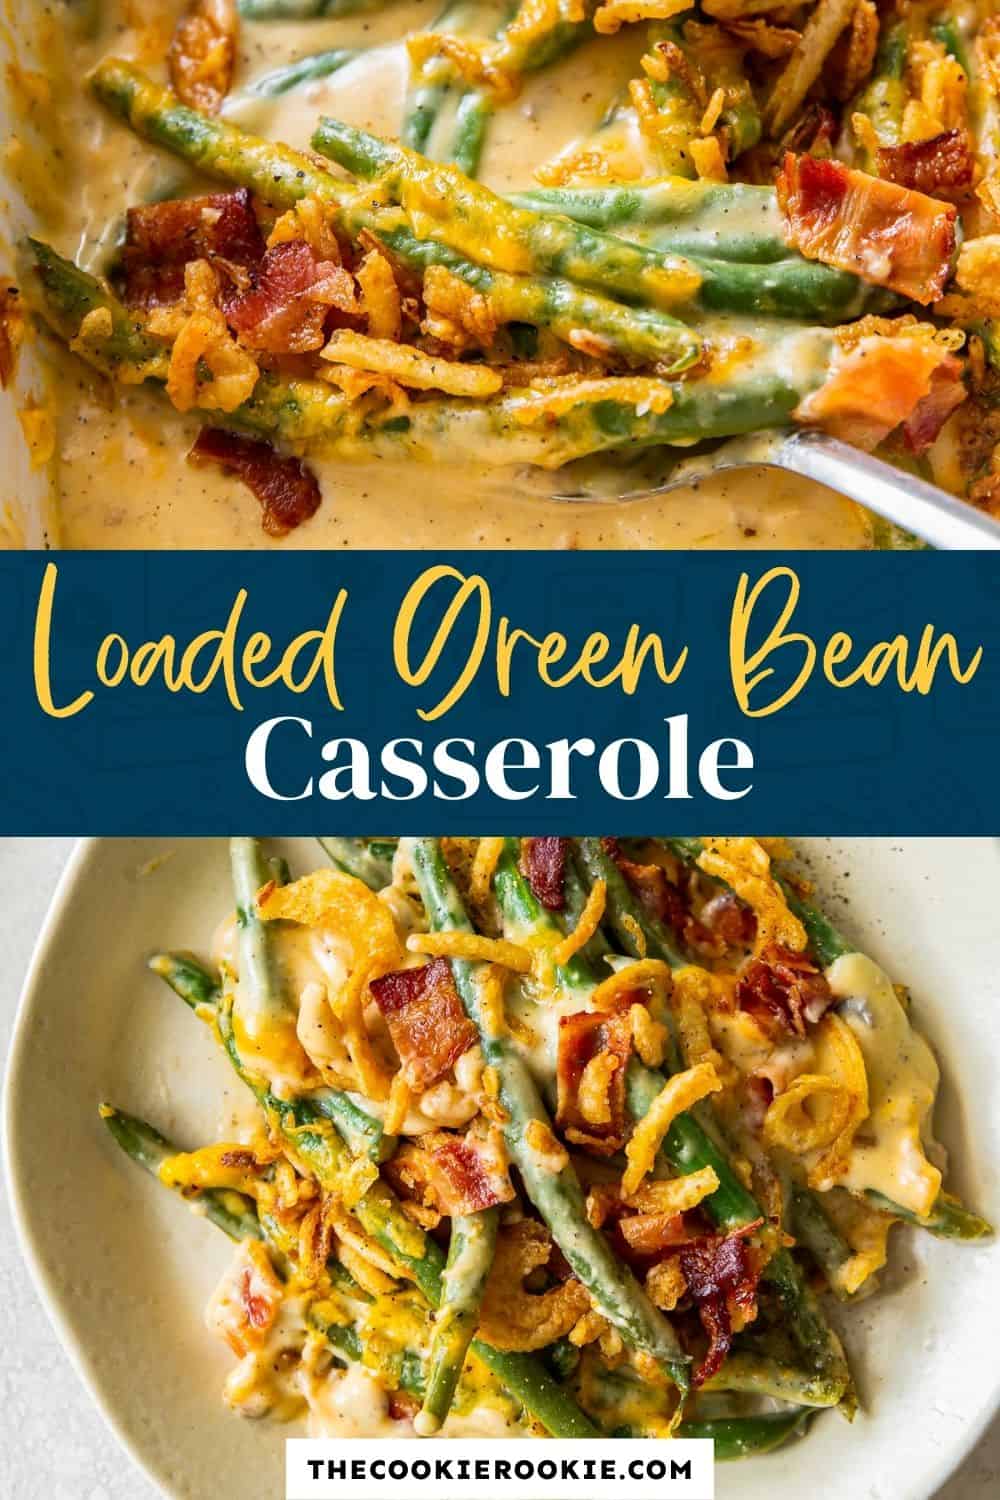 Loaded Green Bean Casserole - The Cookie Rookie®